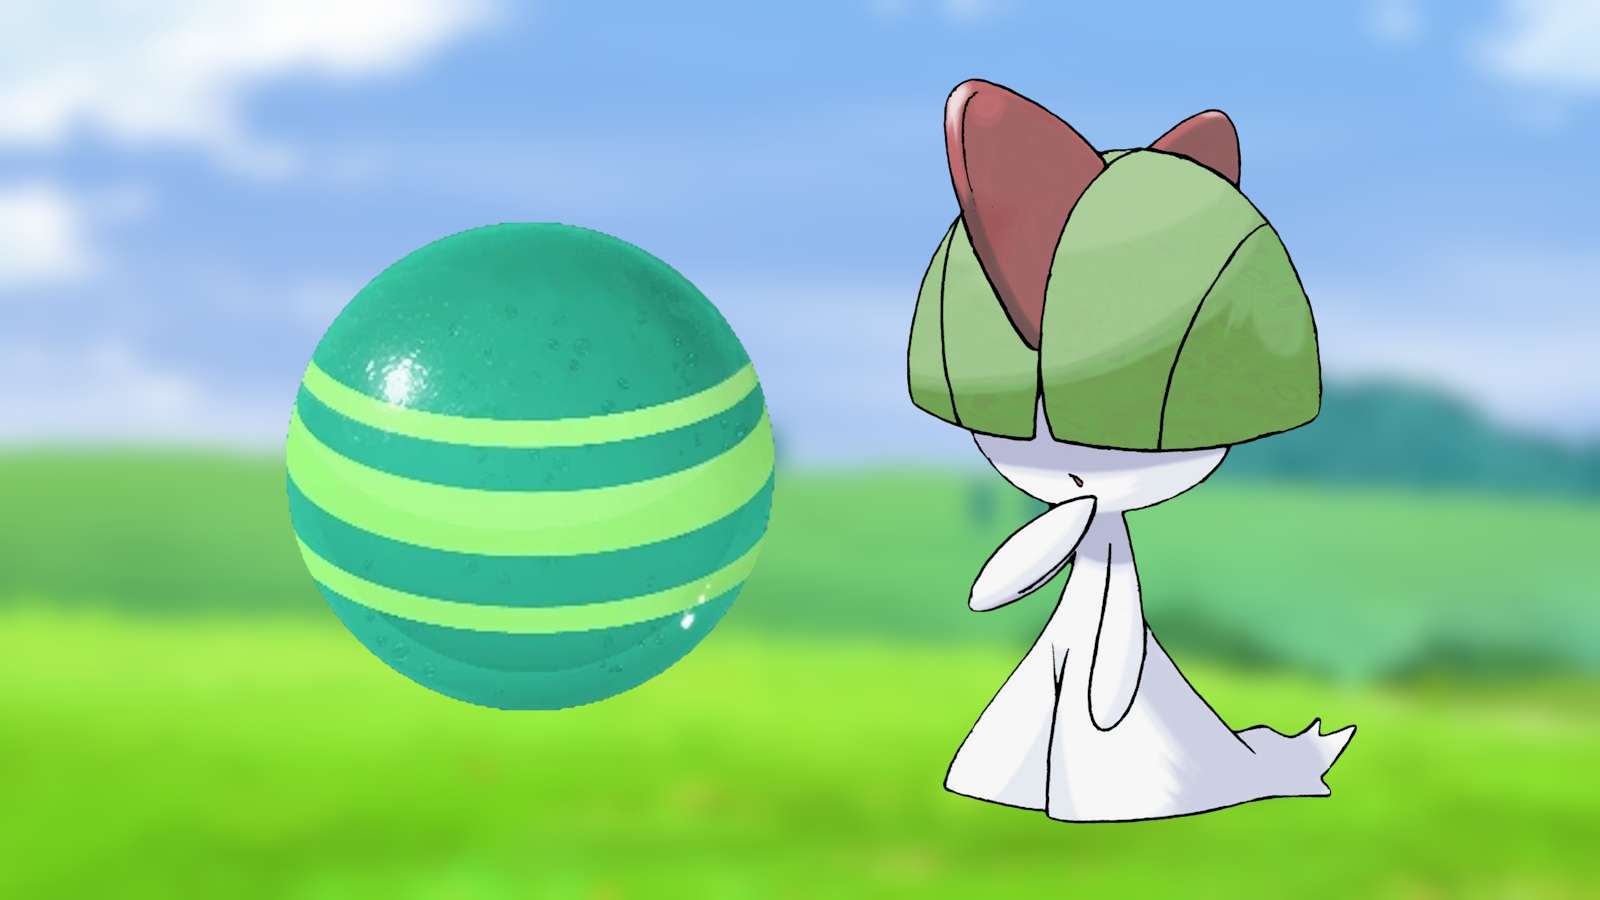 Ralts and Candy next to one another in front of Pokemon Go field.